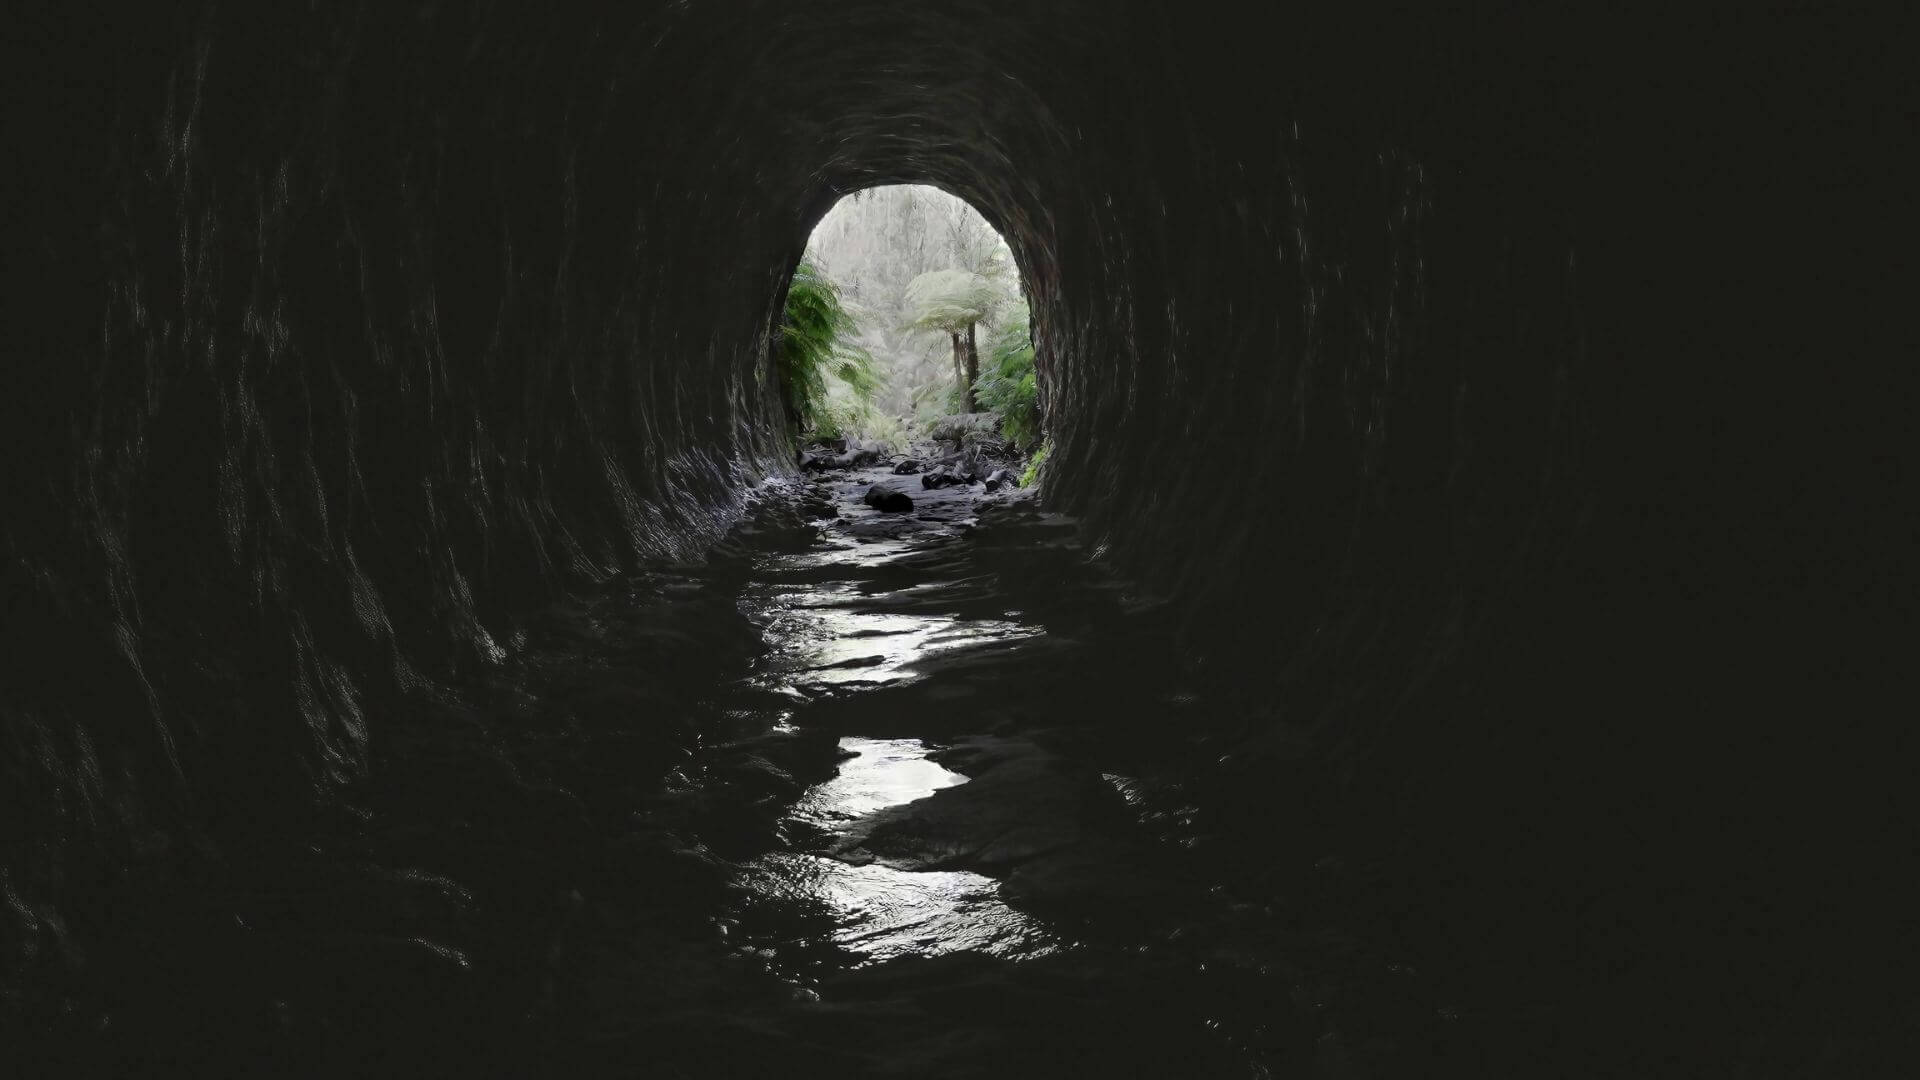 Glow Worm Tunnel, Wollemi National Park